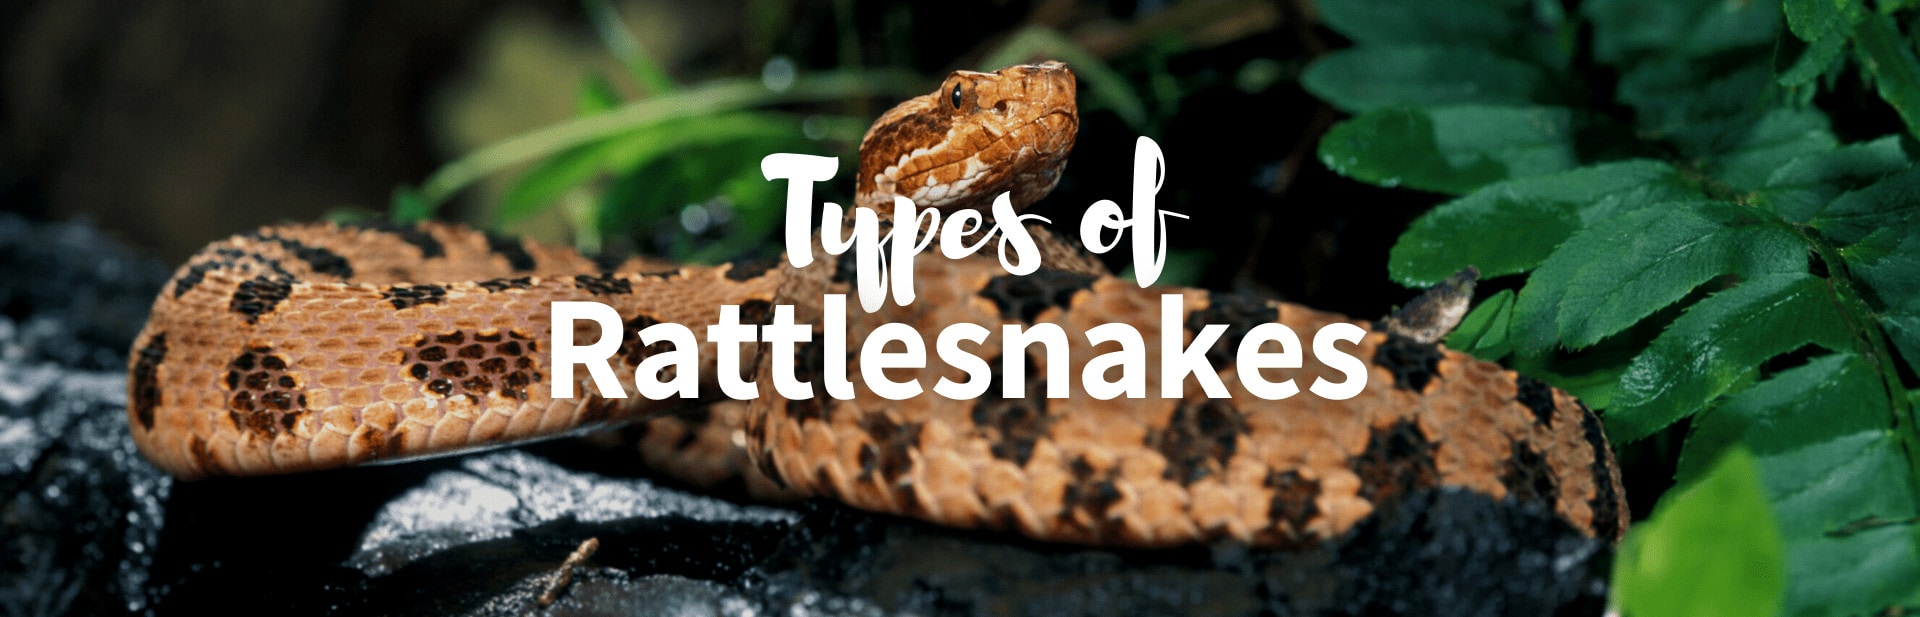 21 Different Types of Rattlesnakes Species: Pictures and Guide